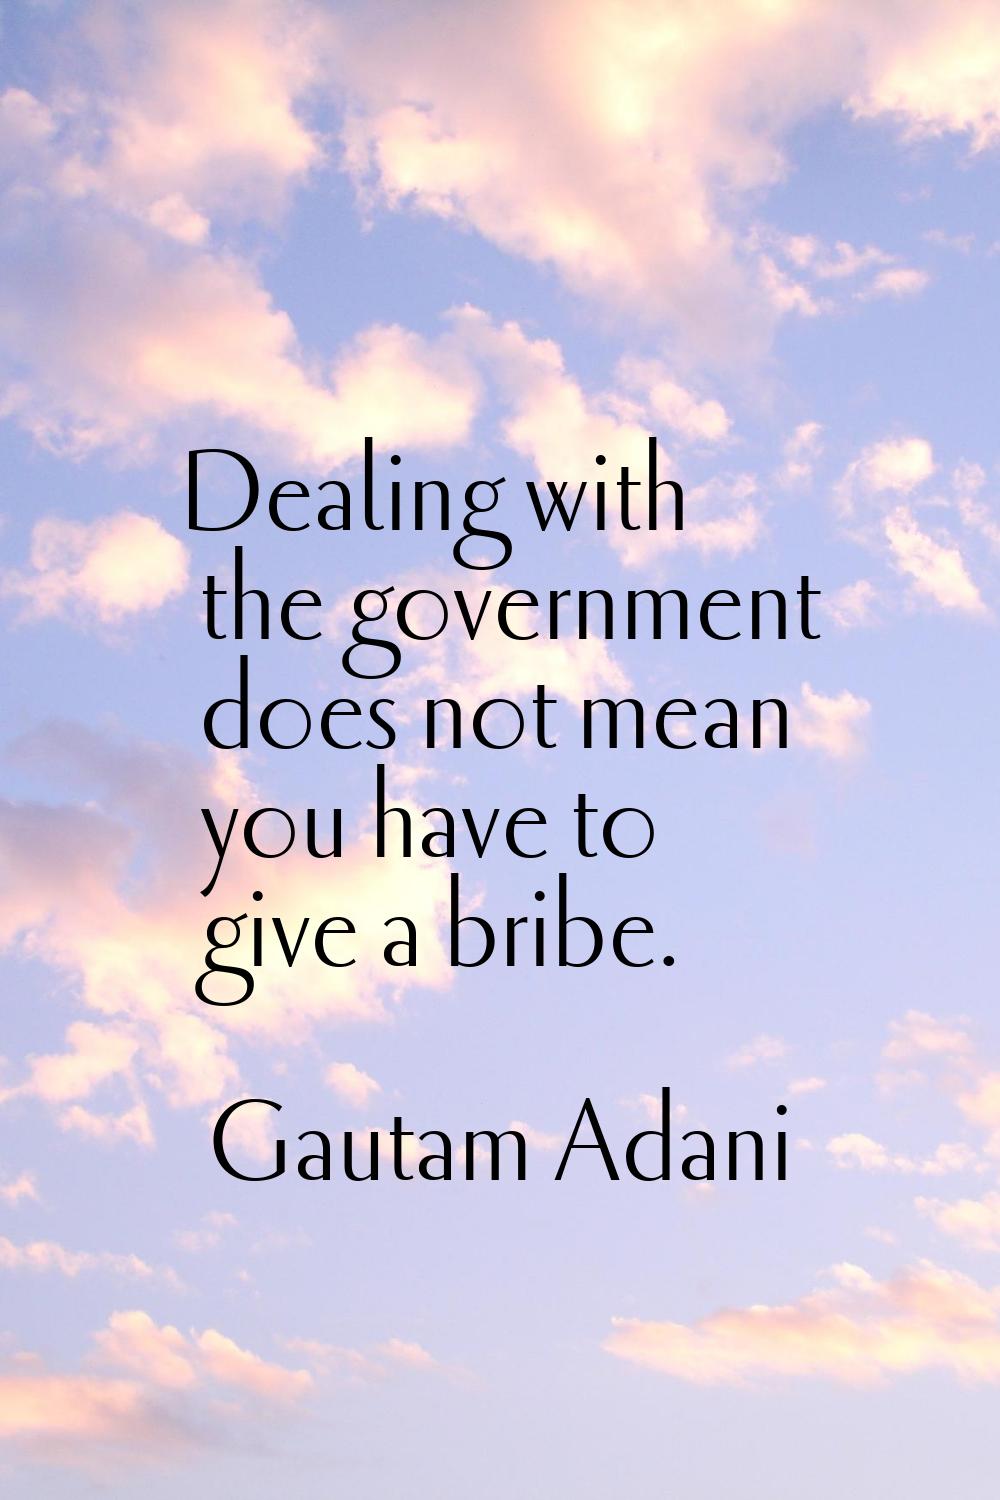 Dealing with the government does not mean you have to give a bribe.